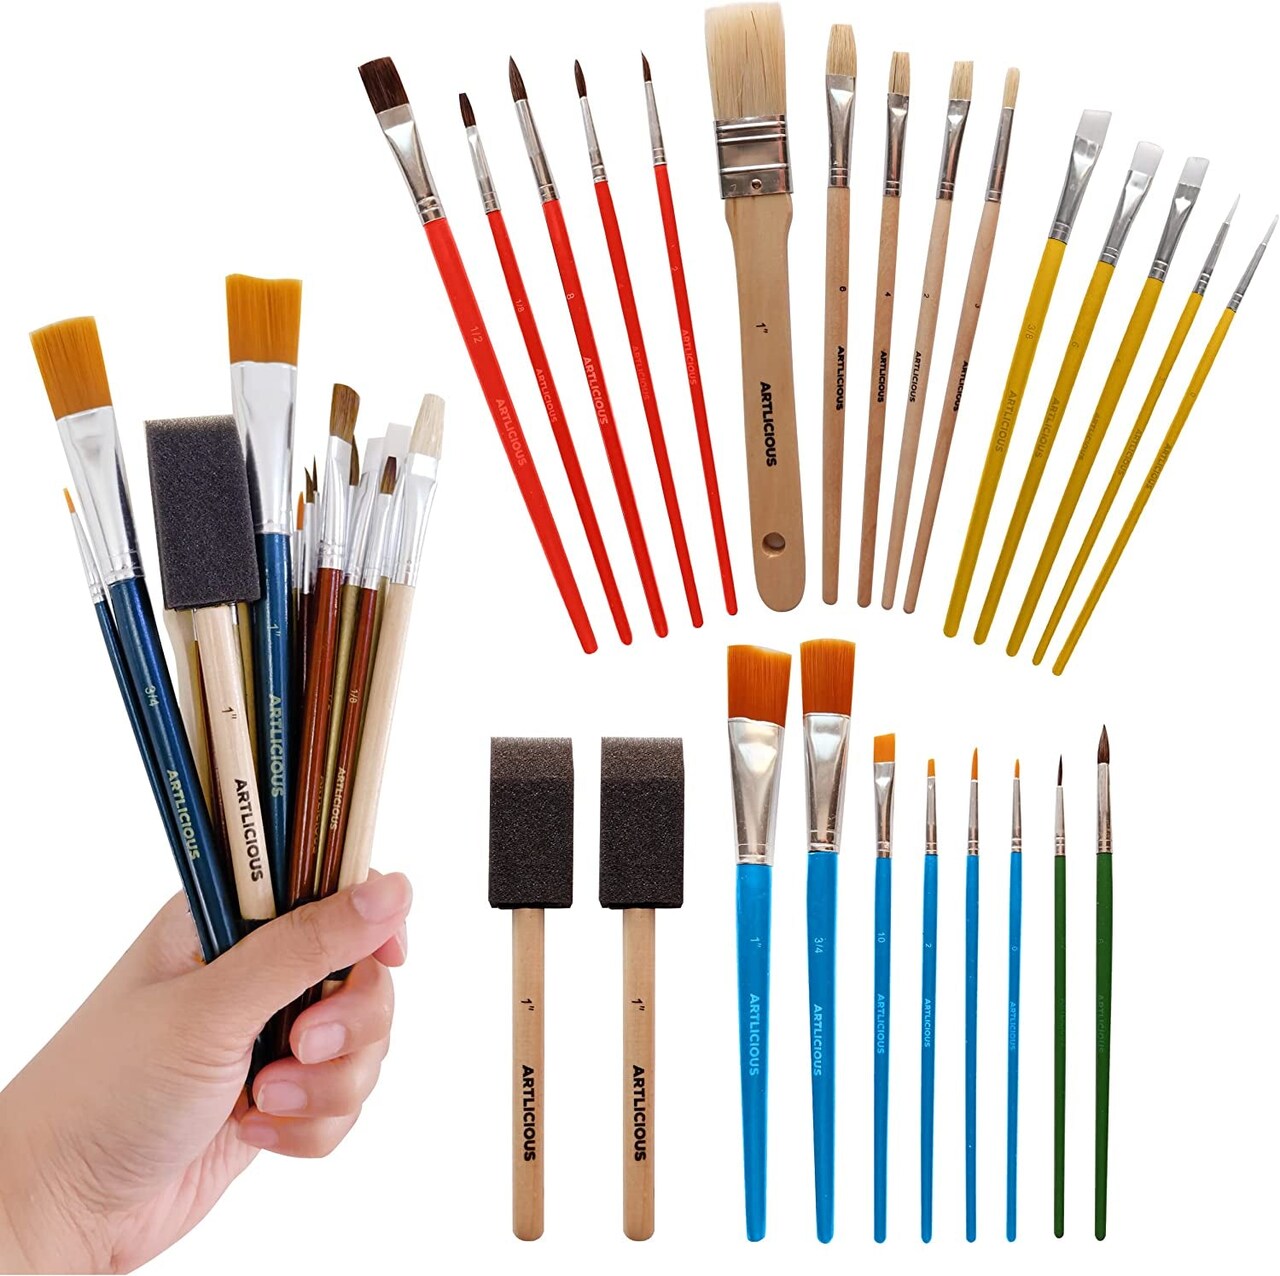 Paint Brushes - Acrylic Paint Set and Detail Paint Brushes for